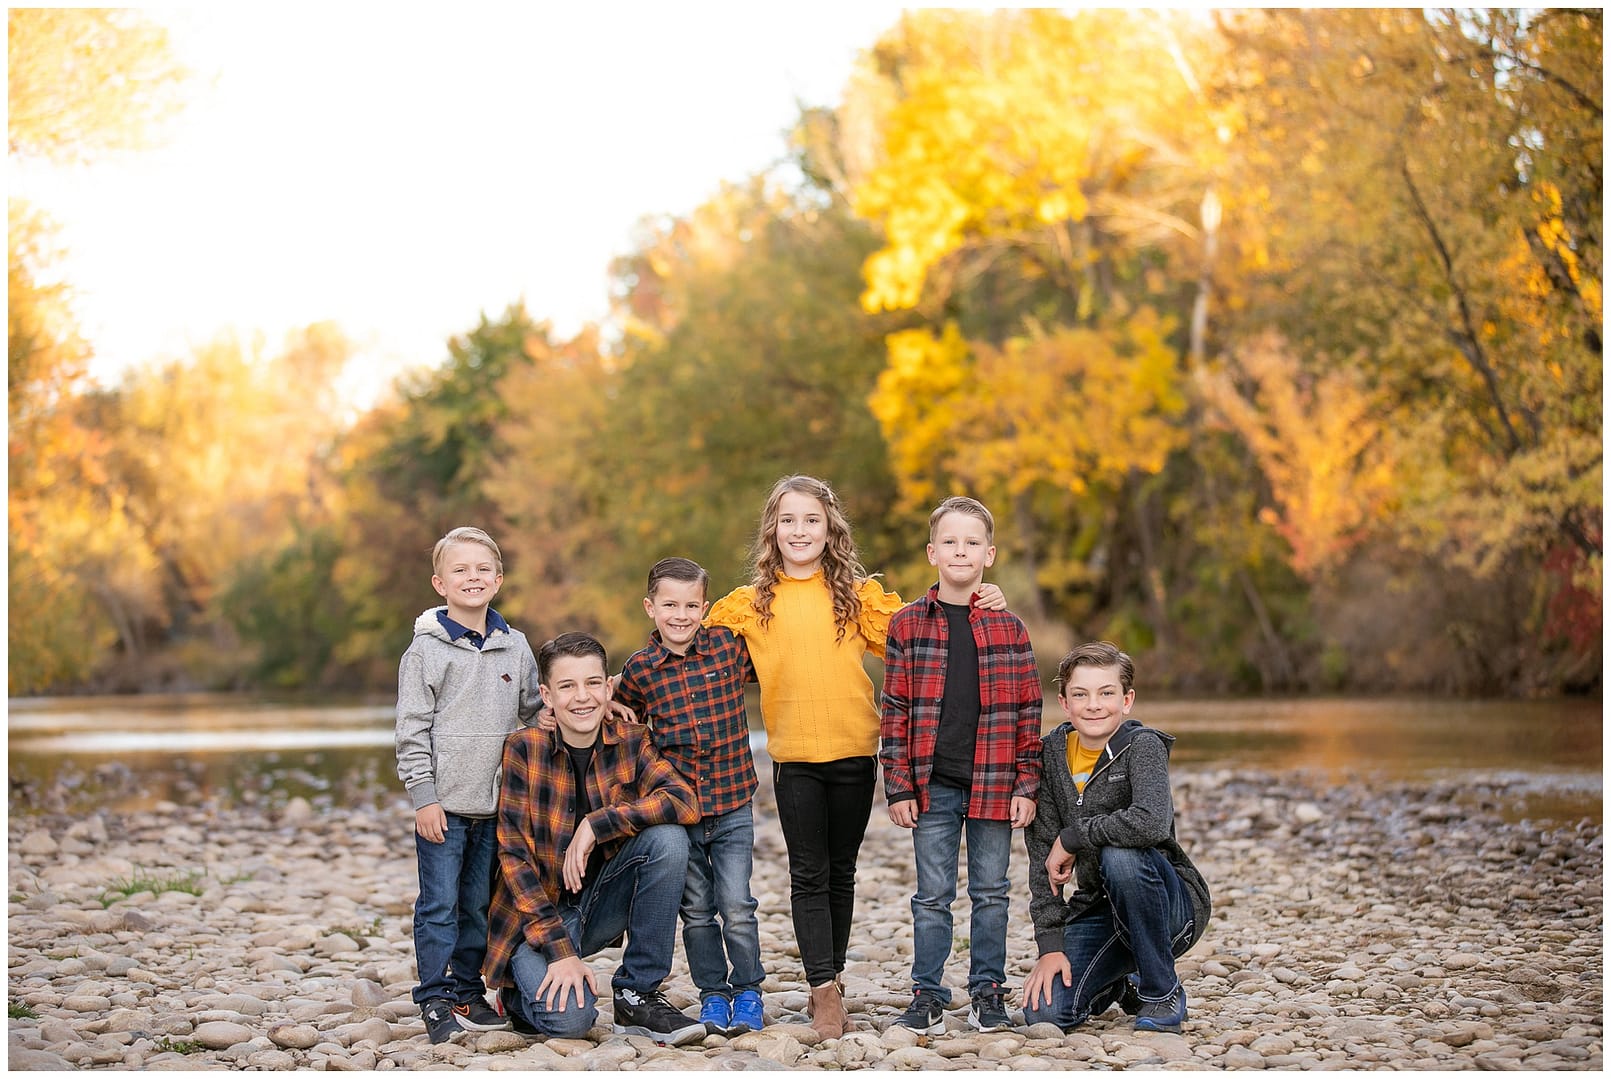 Six siblings pose for Boise family portrait. Photos by Tiffany Hix Photography.